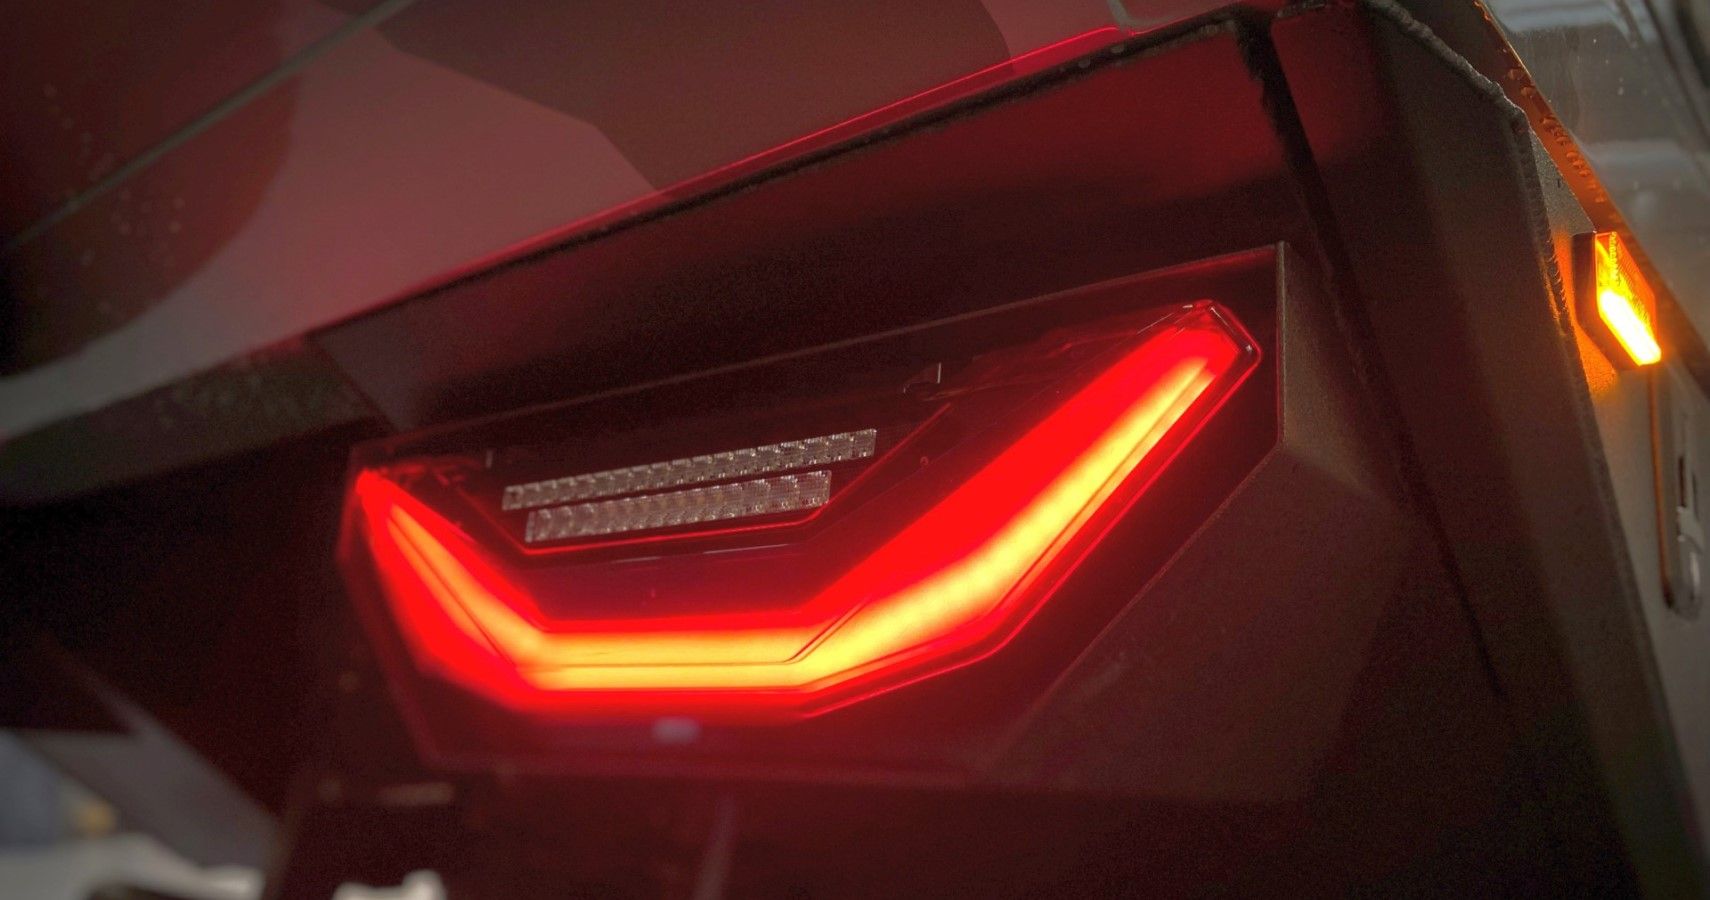 Xpedition Pro XPRO One LED taillight close-up view